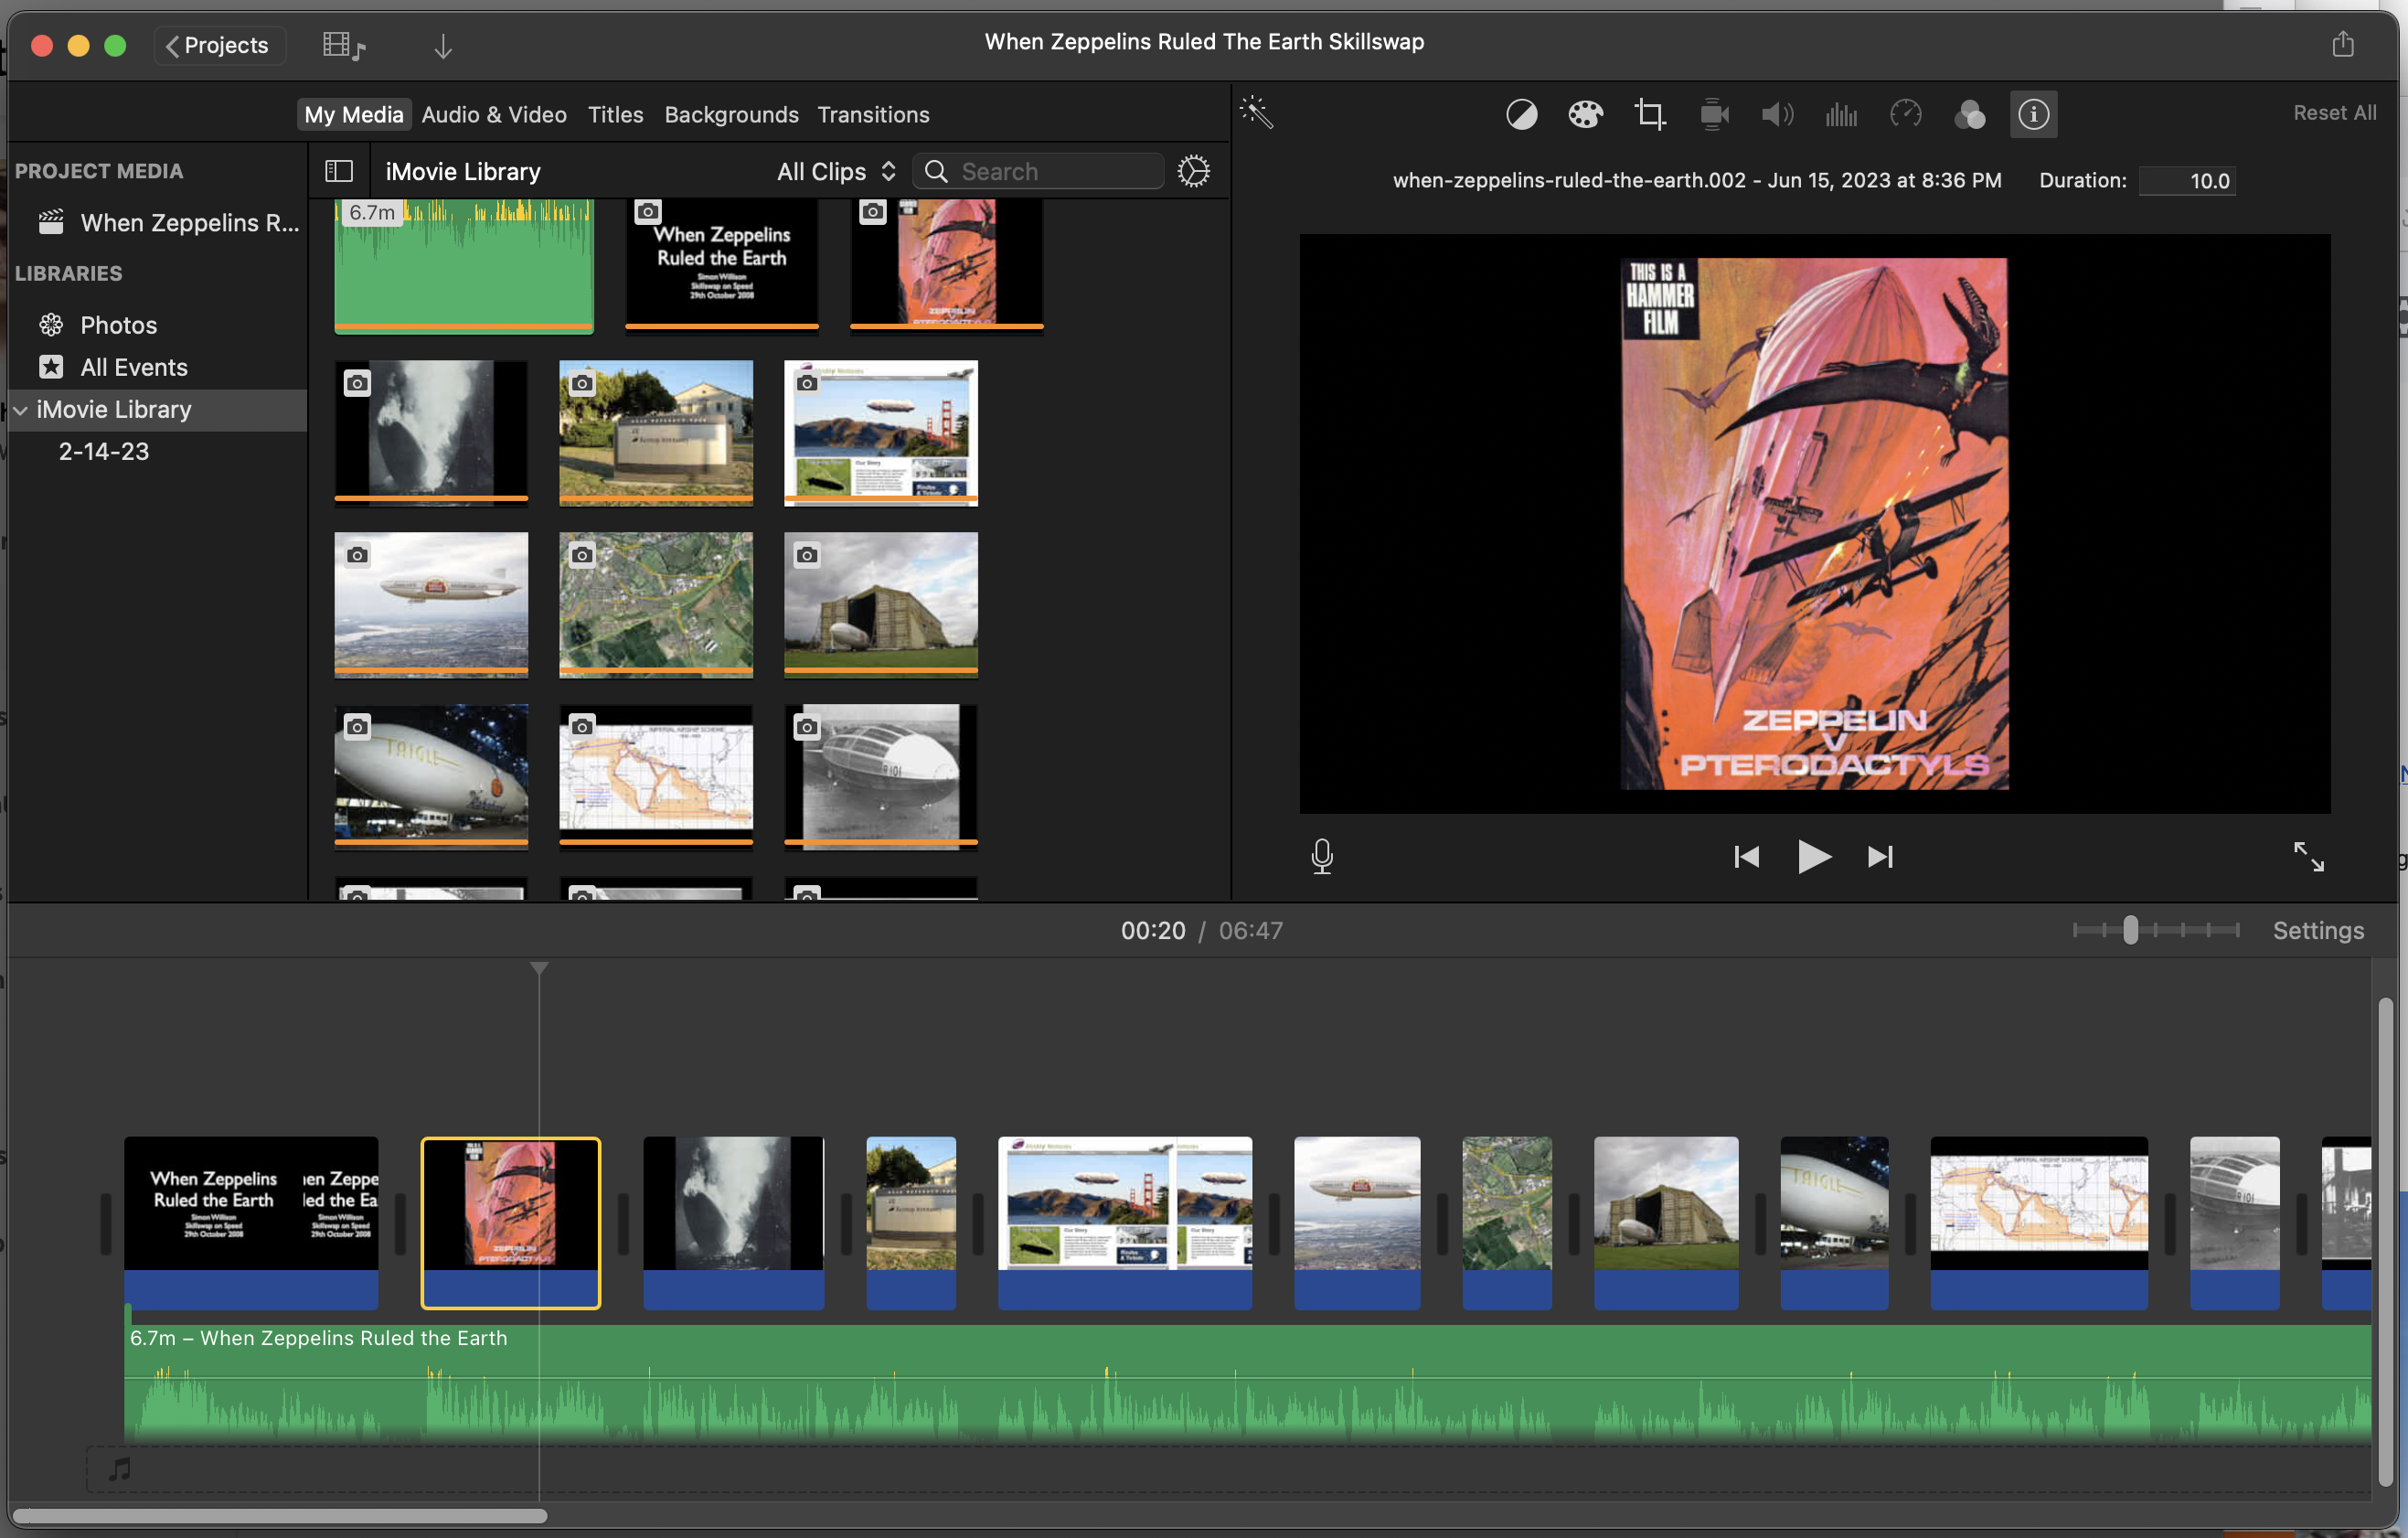 Screenshot of a iMovie edit timeline showing the form for editing the duration of an image